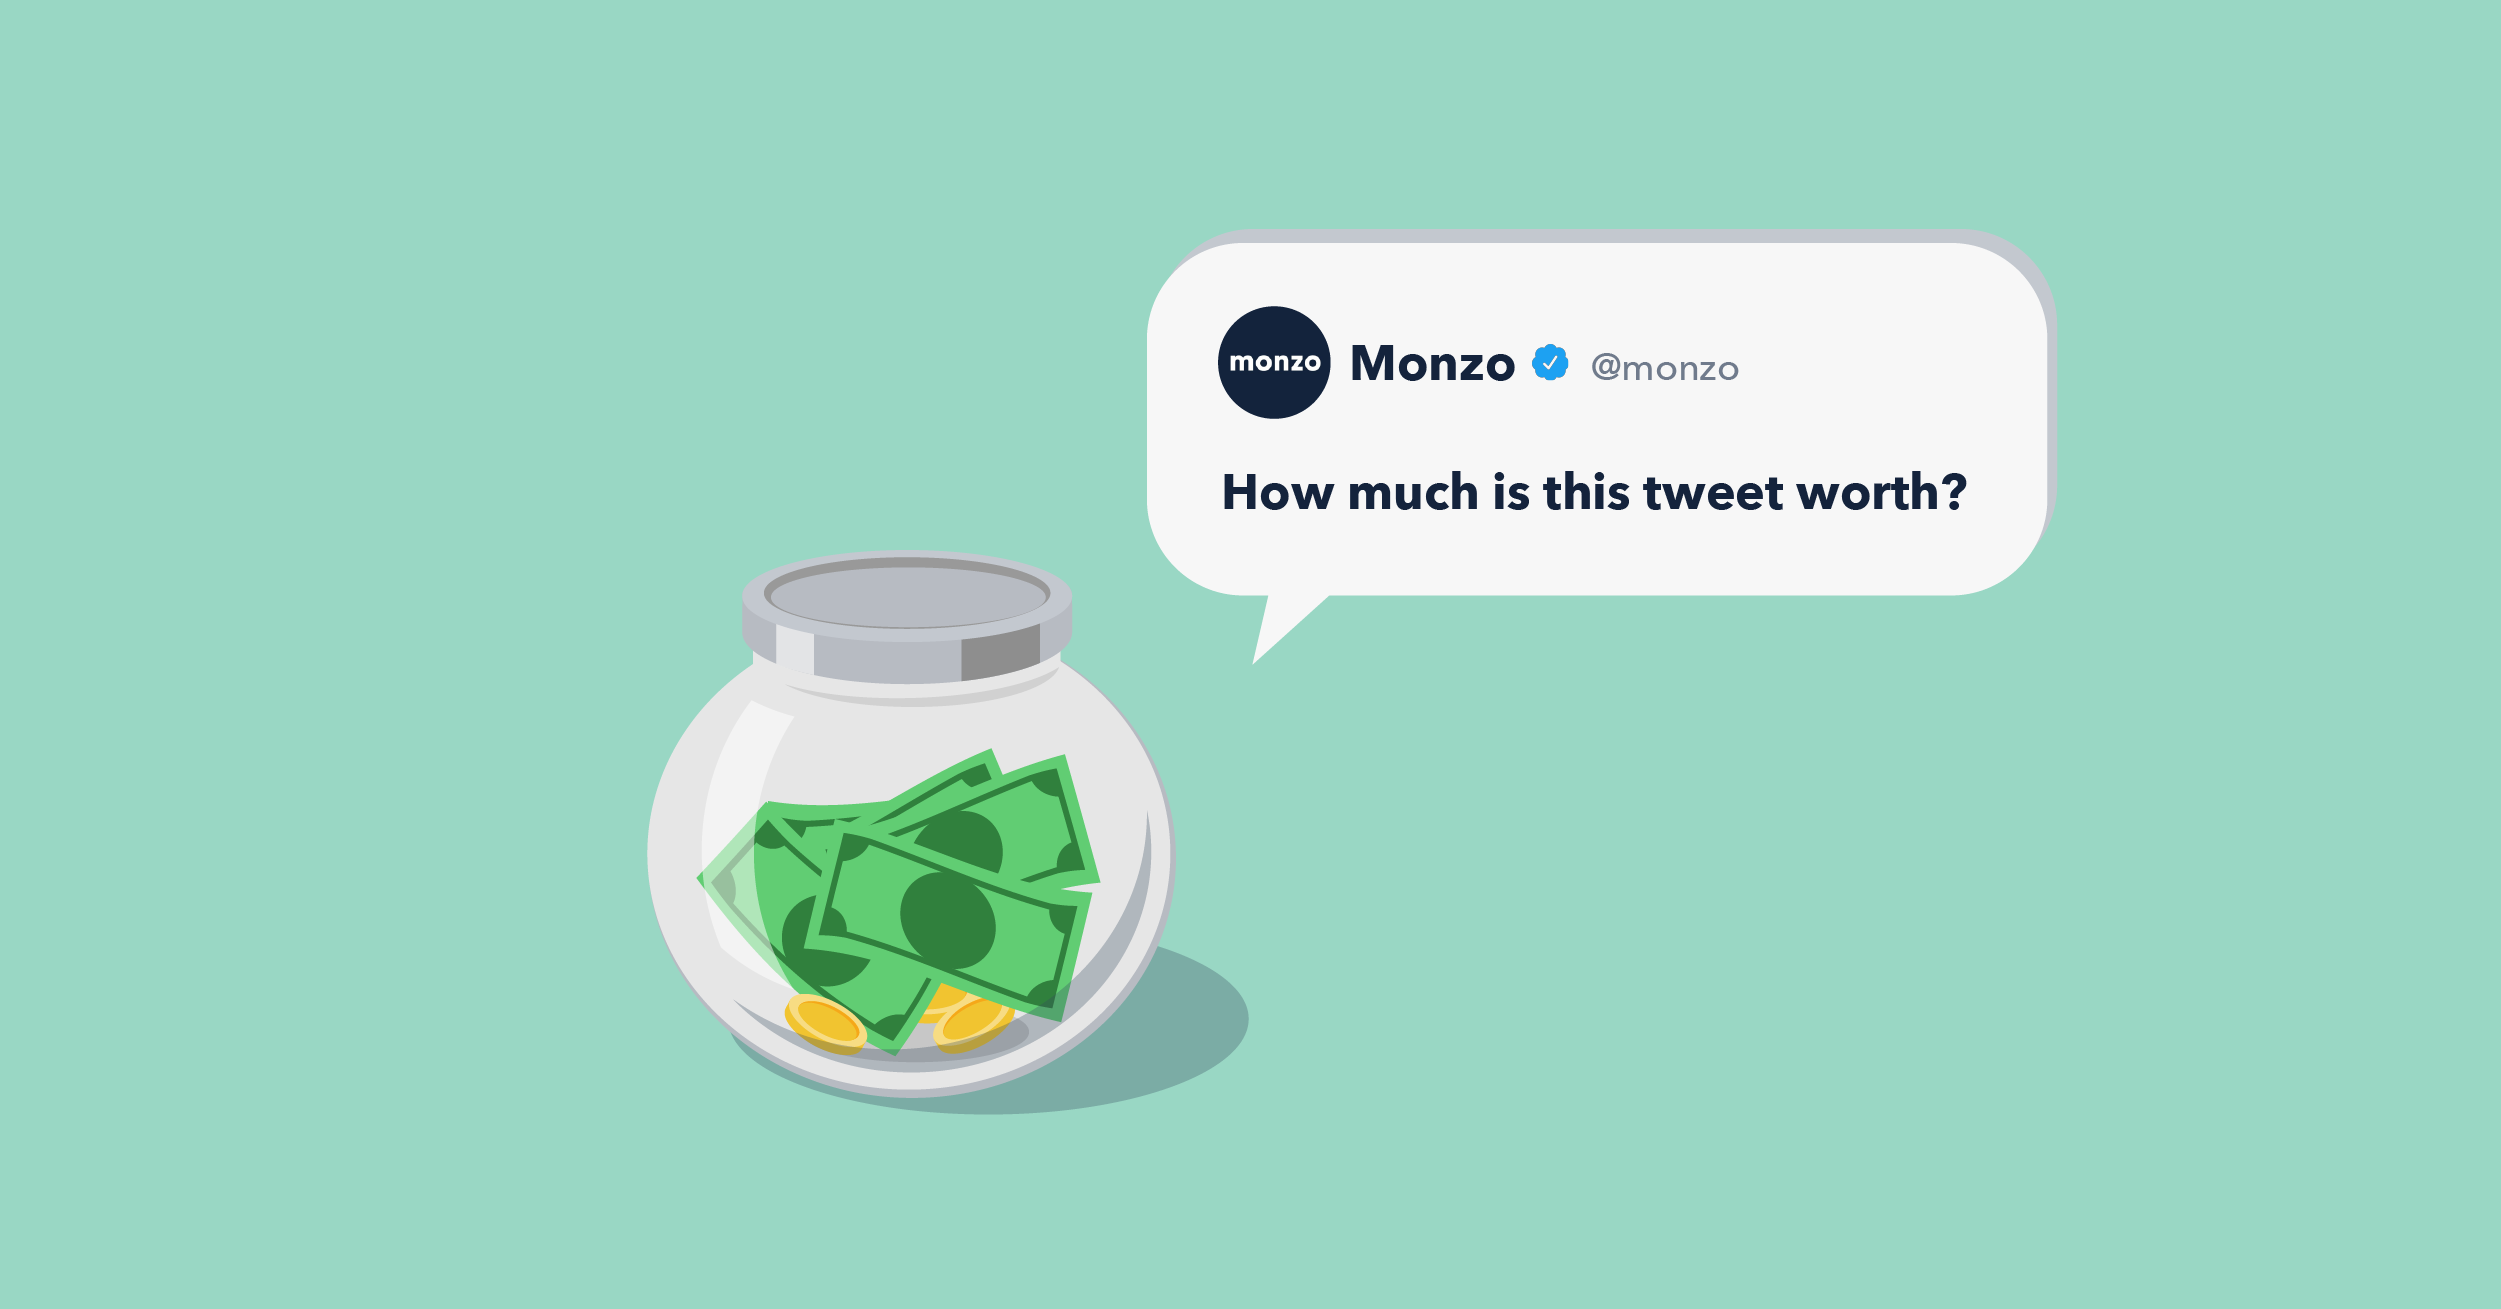 A pot of money with a speech bubble of a tweet asking "How much is this tweet worth?"